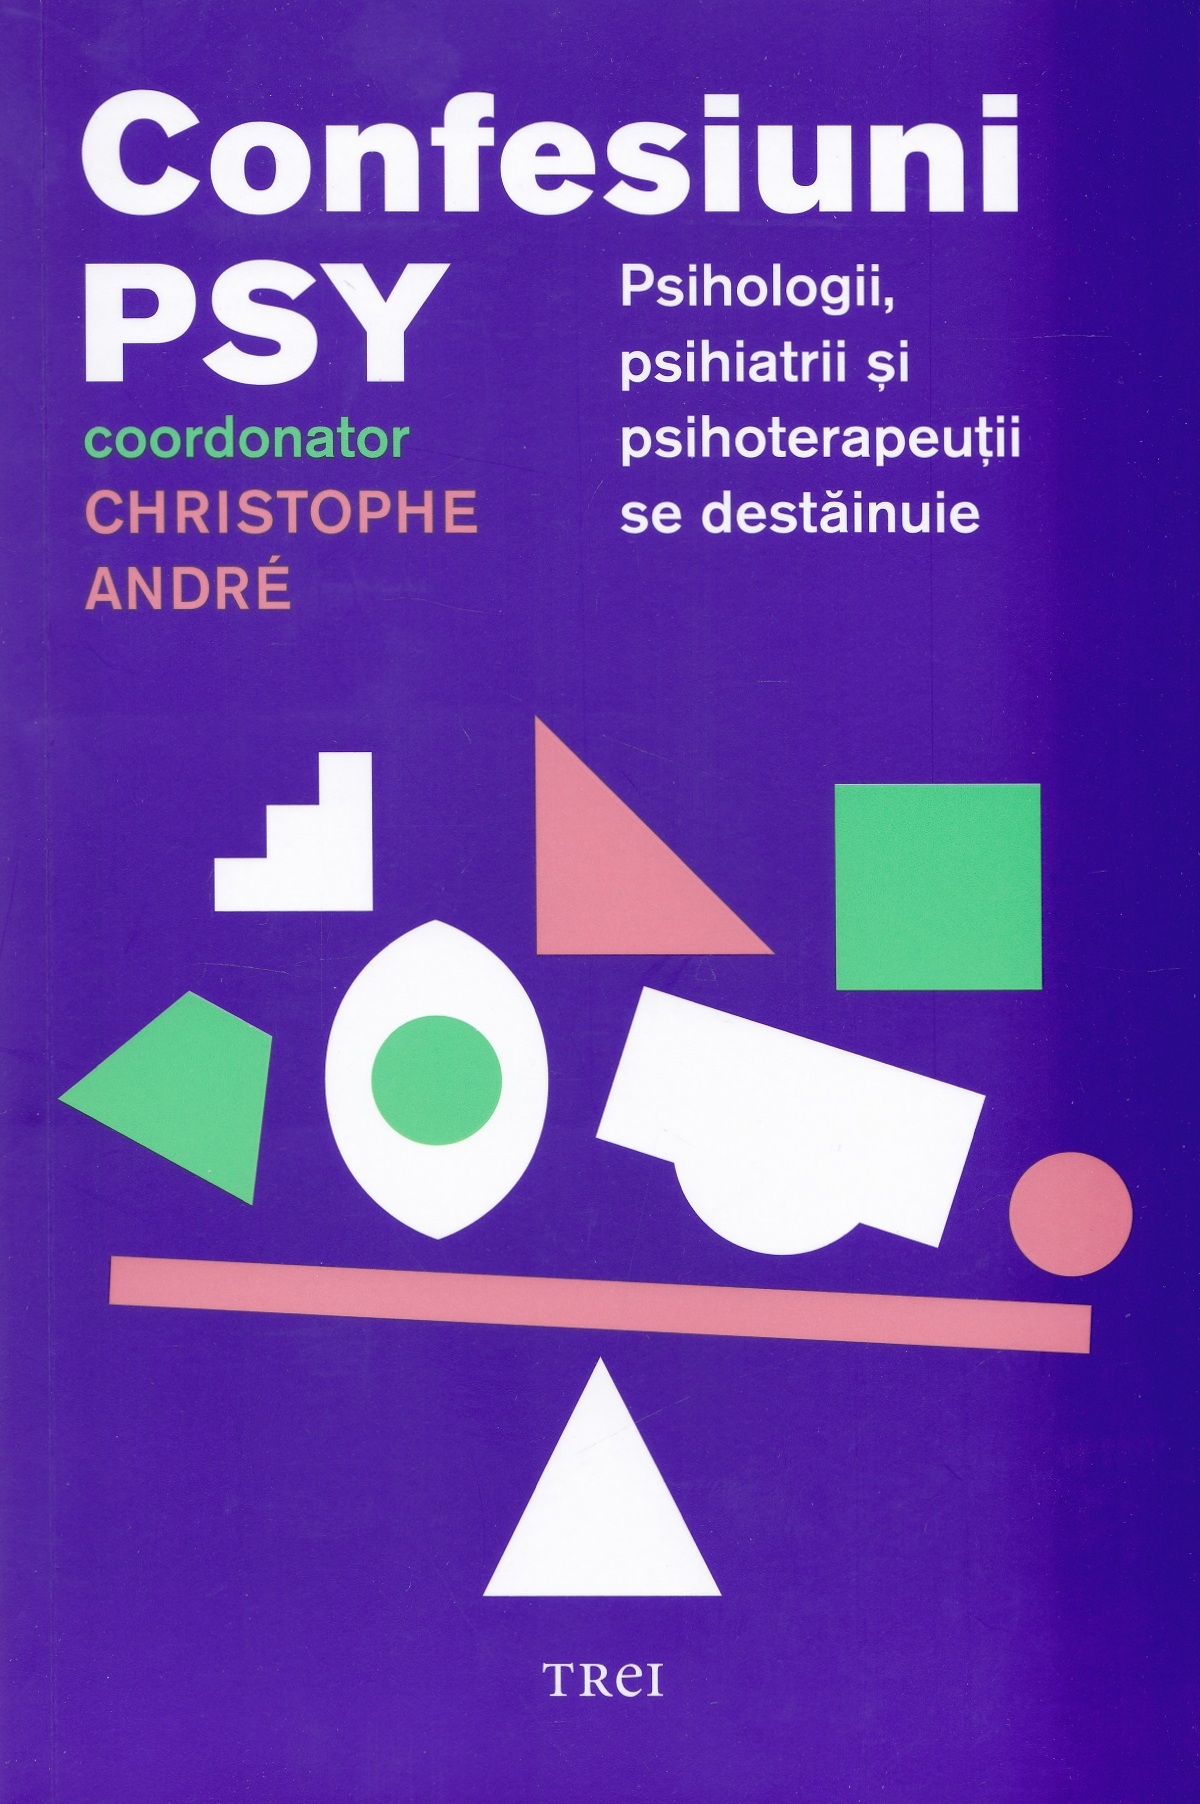 Confesiuni PSY - Christophe Andre